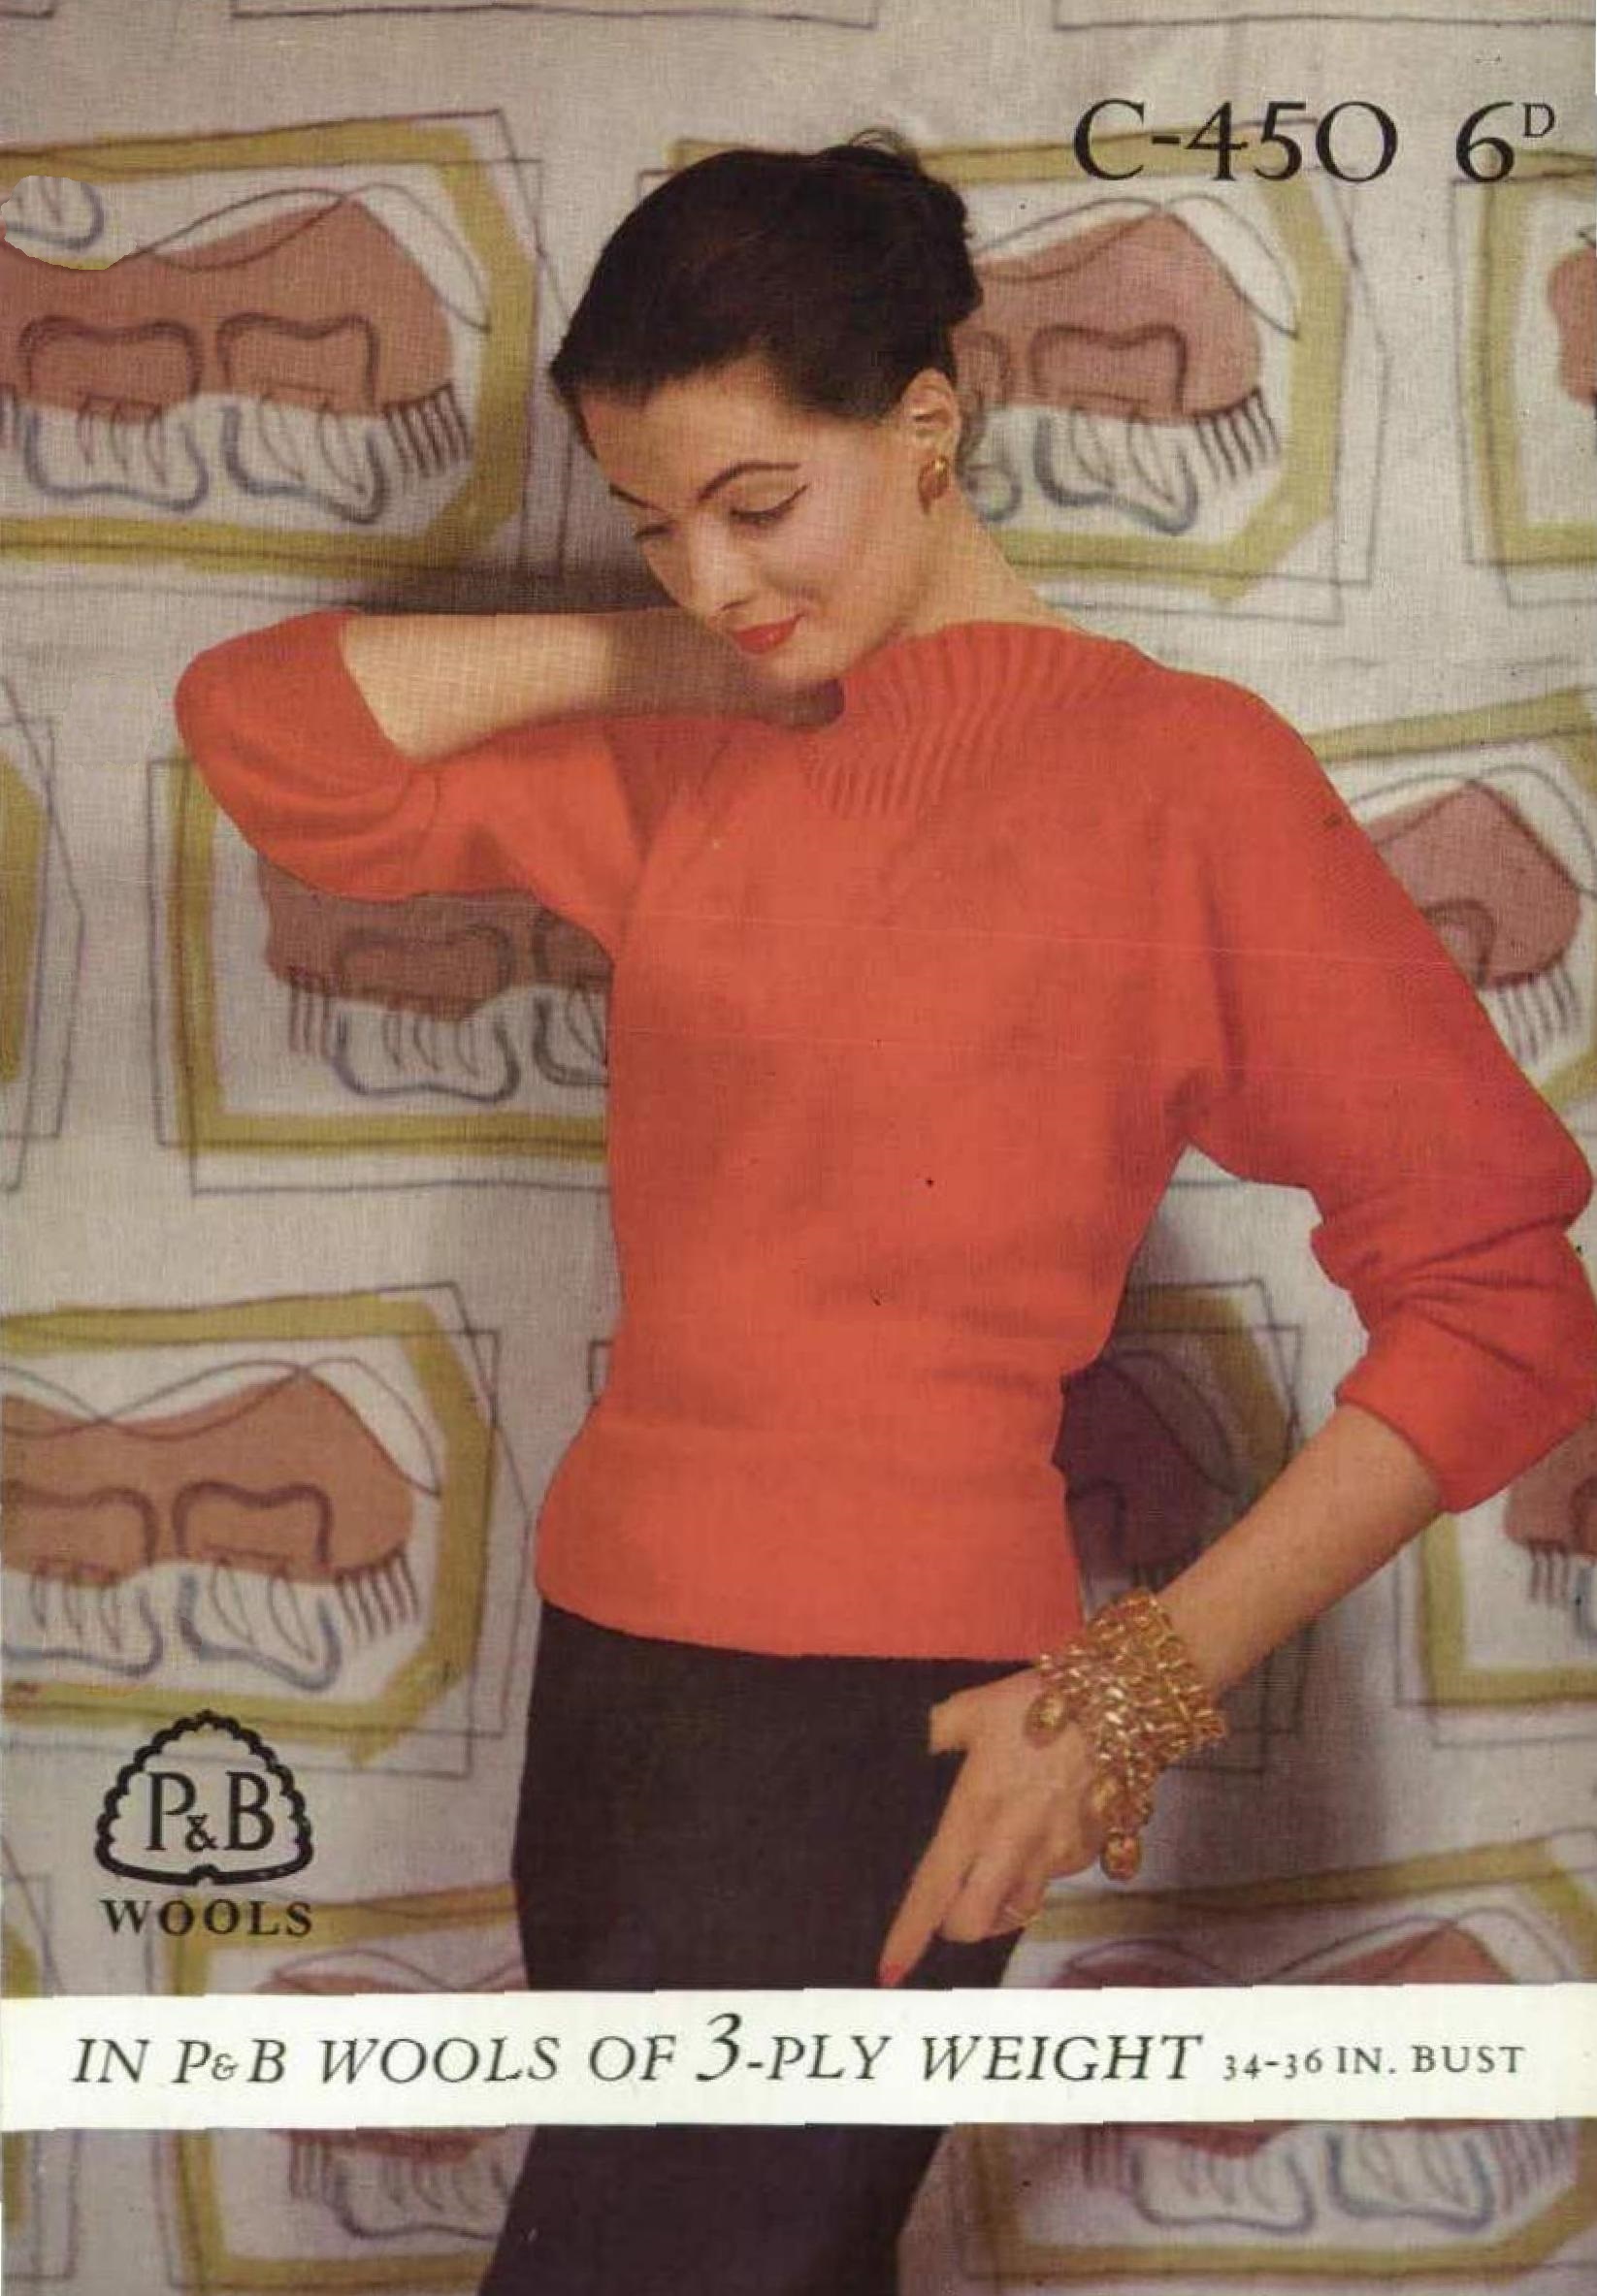 Cover of Patons pattern C-450 - in P&B wools of 3-ply weight, 34-36 in bust. Showing lady wearing bright red three-quarter sleeve jumper with high ribbed neck that grows from V-shape.